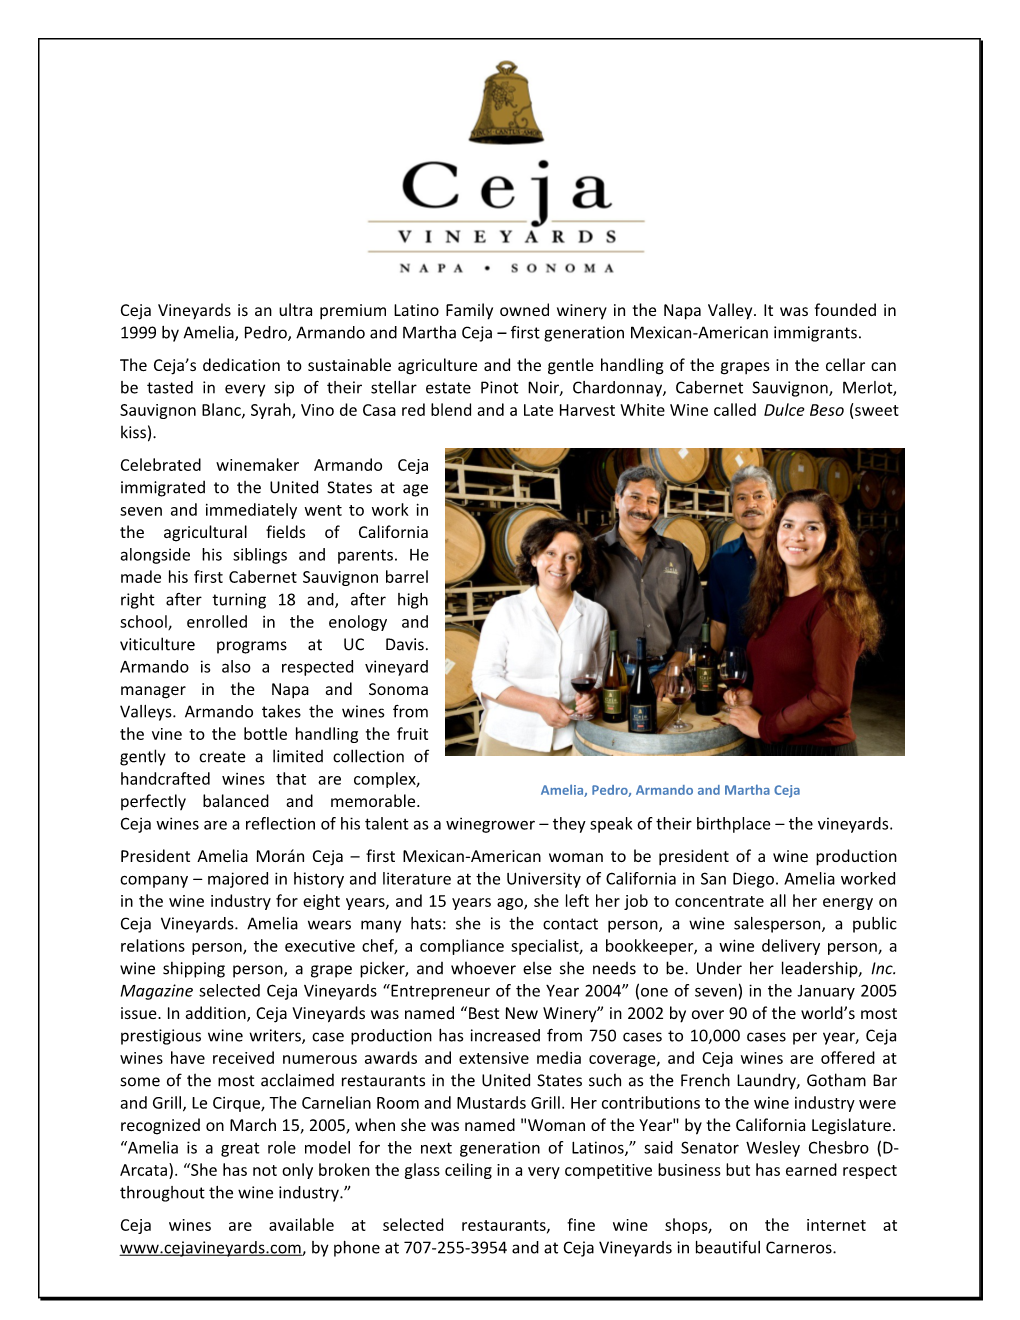 The Ceja S Dedication to Sustainable Agriculture and the Gentle Handling of the Grapes